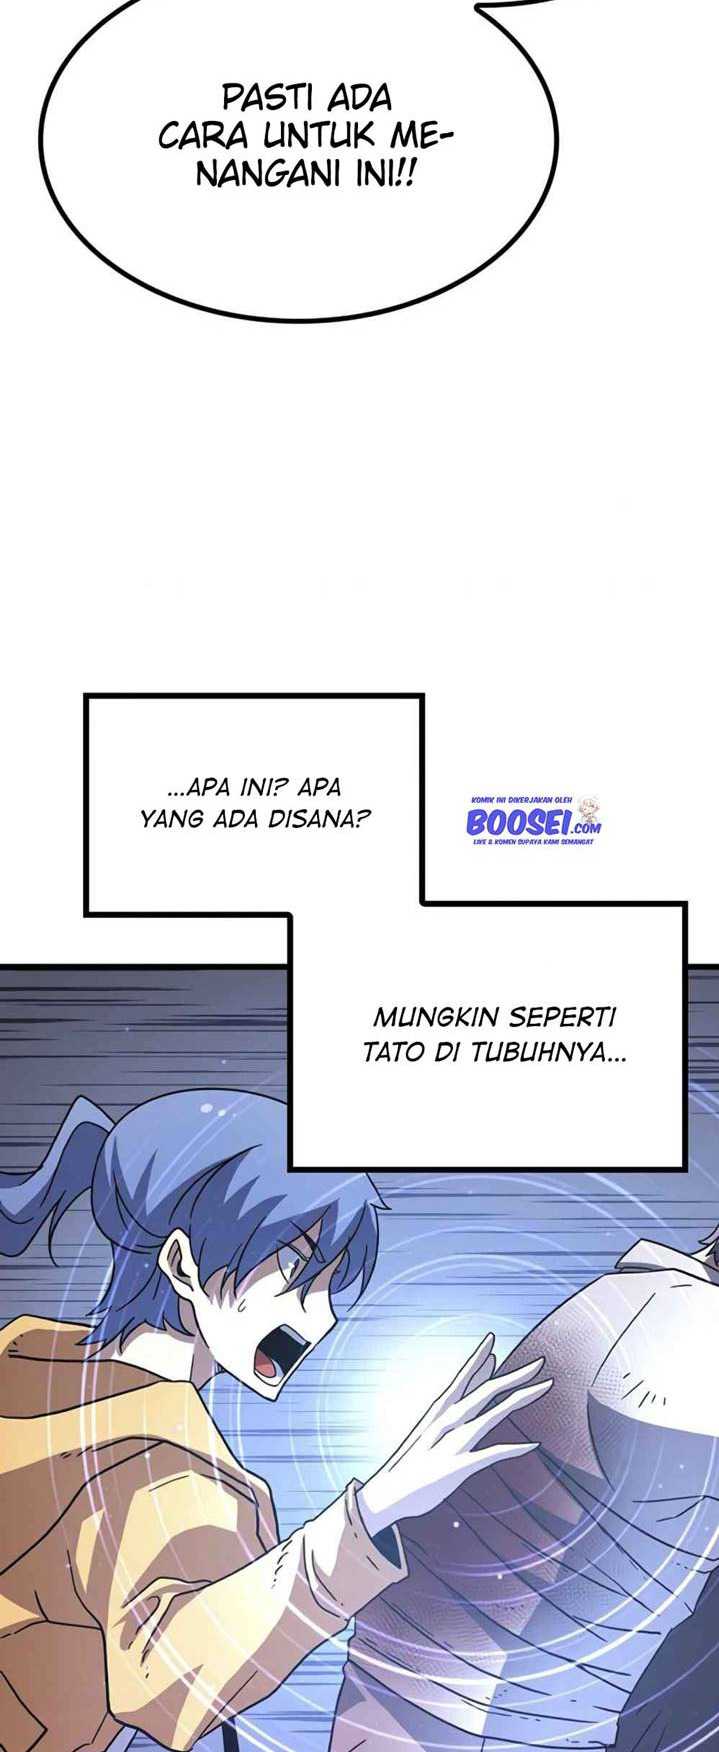 Hitpoint Chapter 7